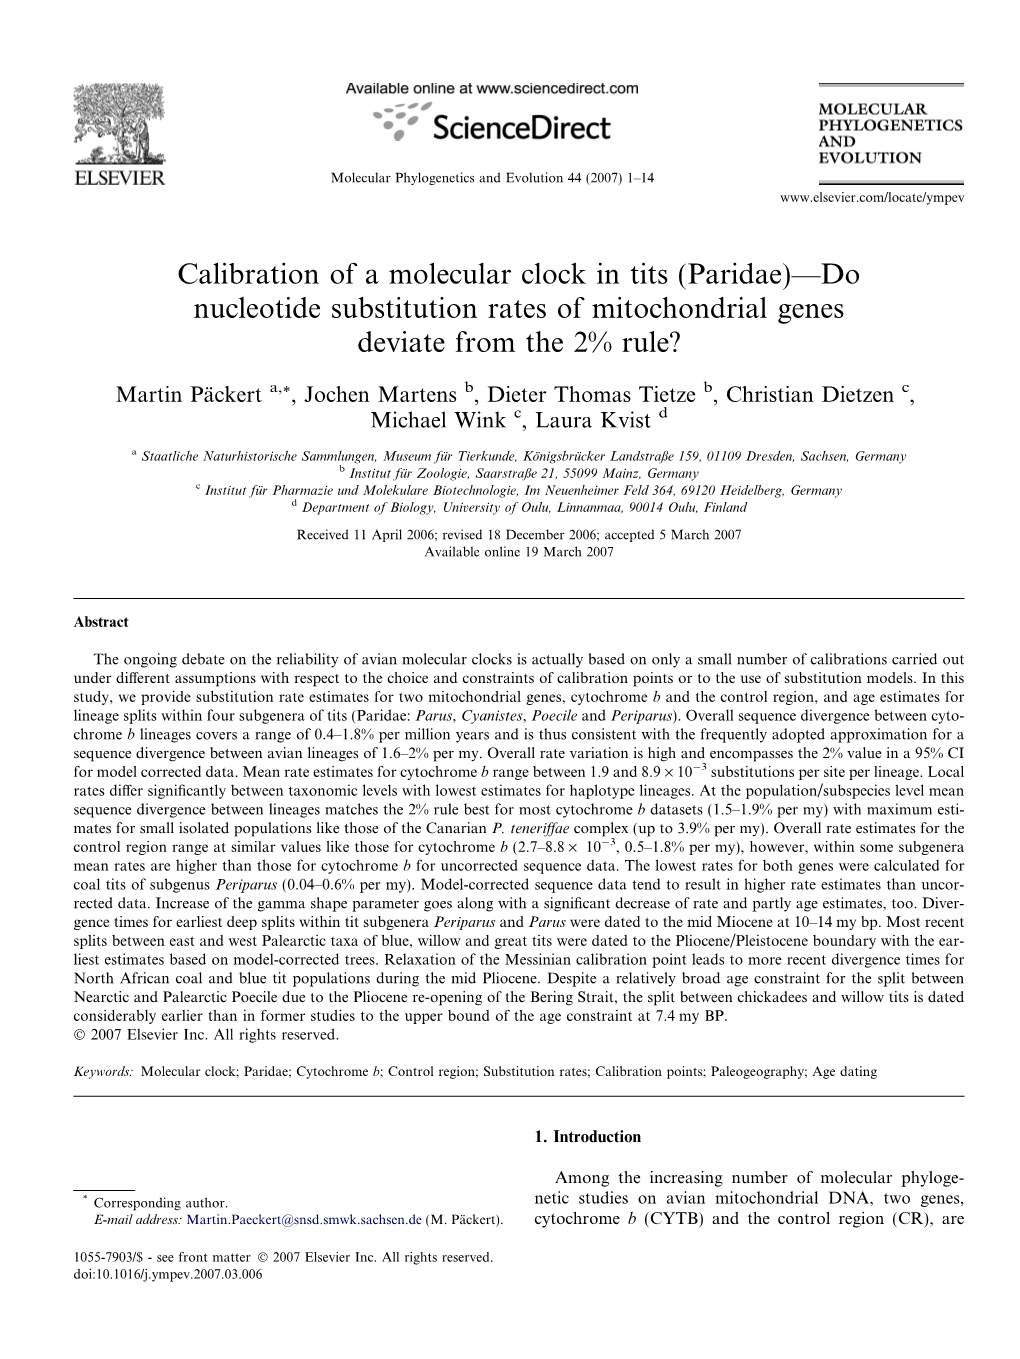 Calibration of a Molecular Clock in Tits (Paridae)—Do Nucleotide Substitution Rates of Mitochondrial Genes Deviate from the 2% Rule?